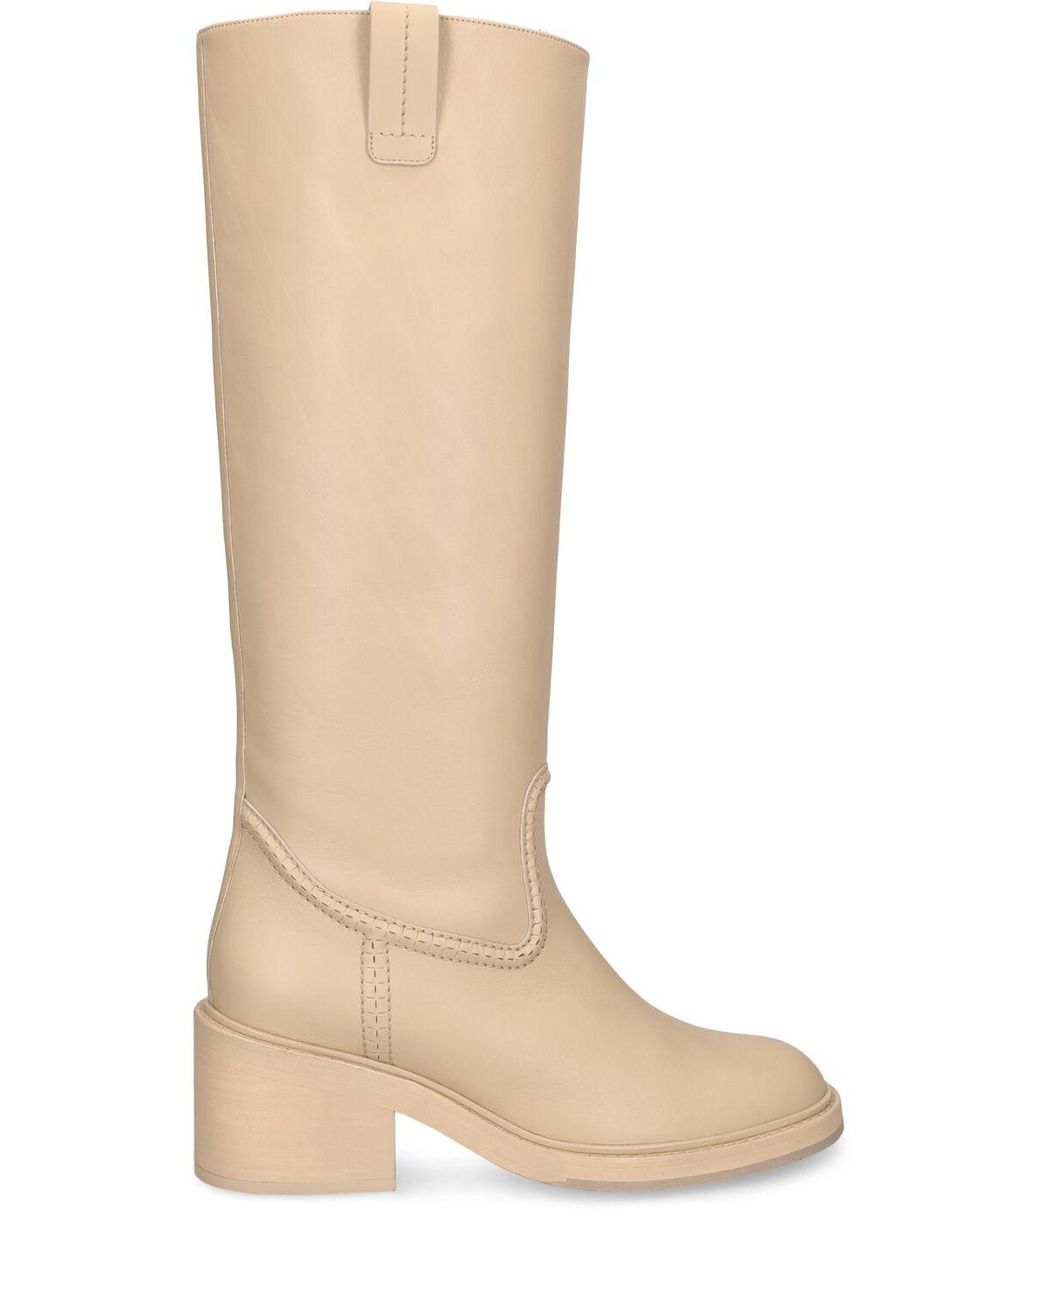 Chloé 60mm Mallo Leather Tall Boots in Natural | Lyst Australia